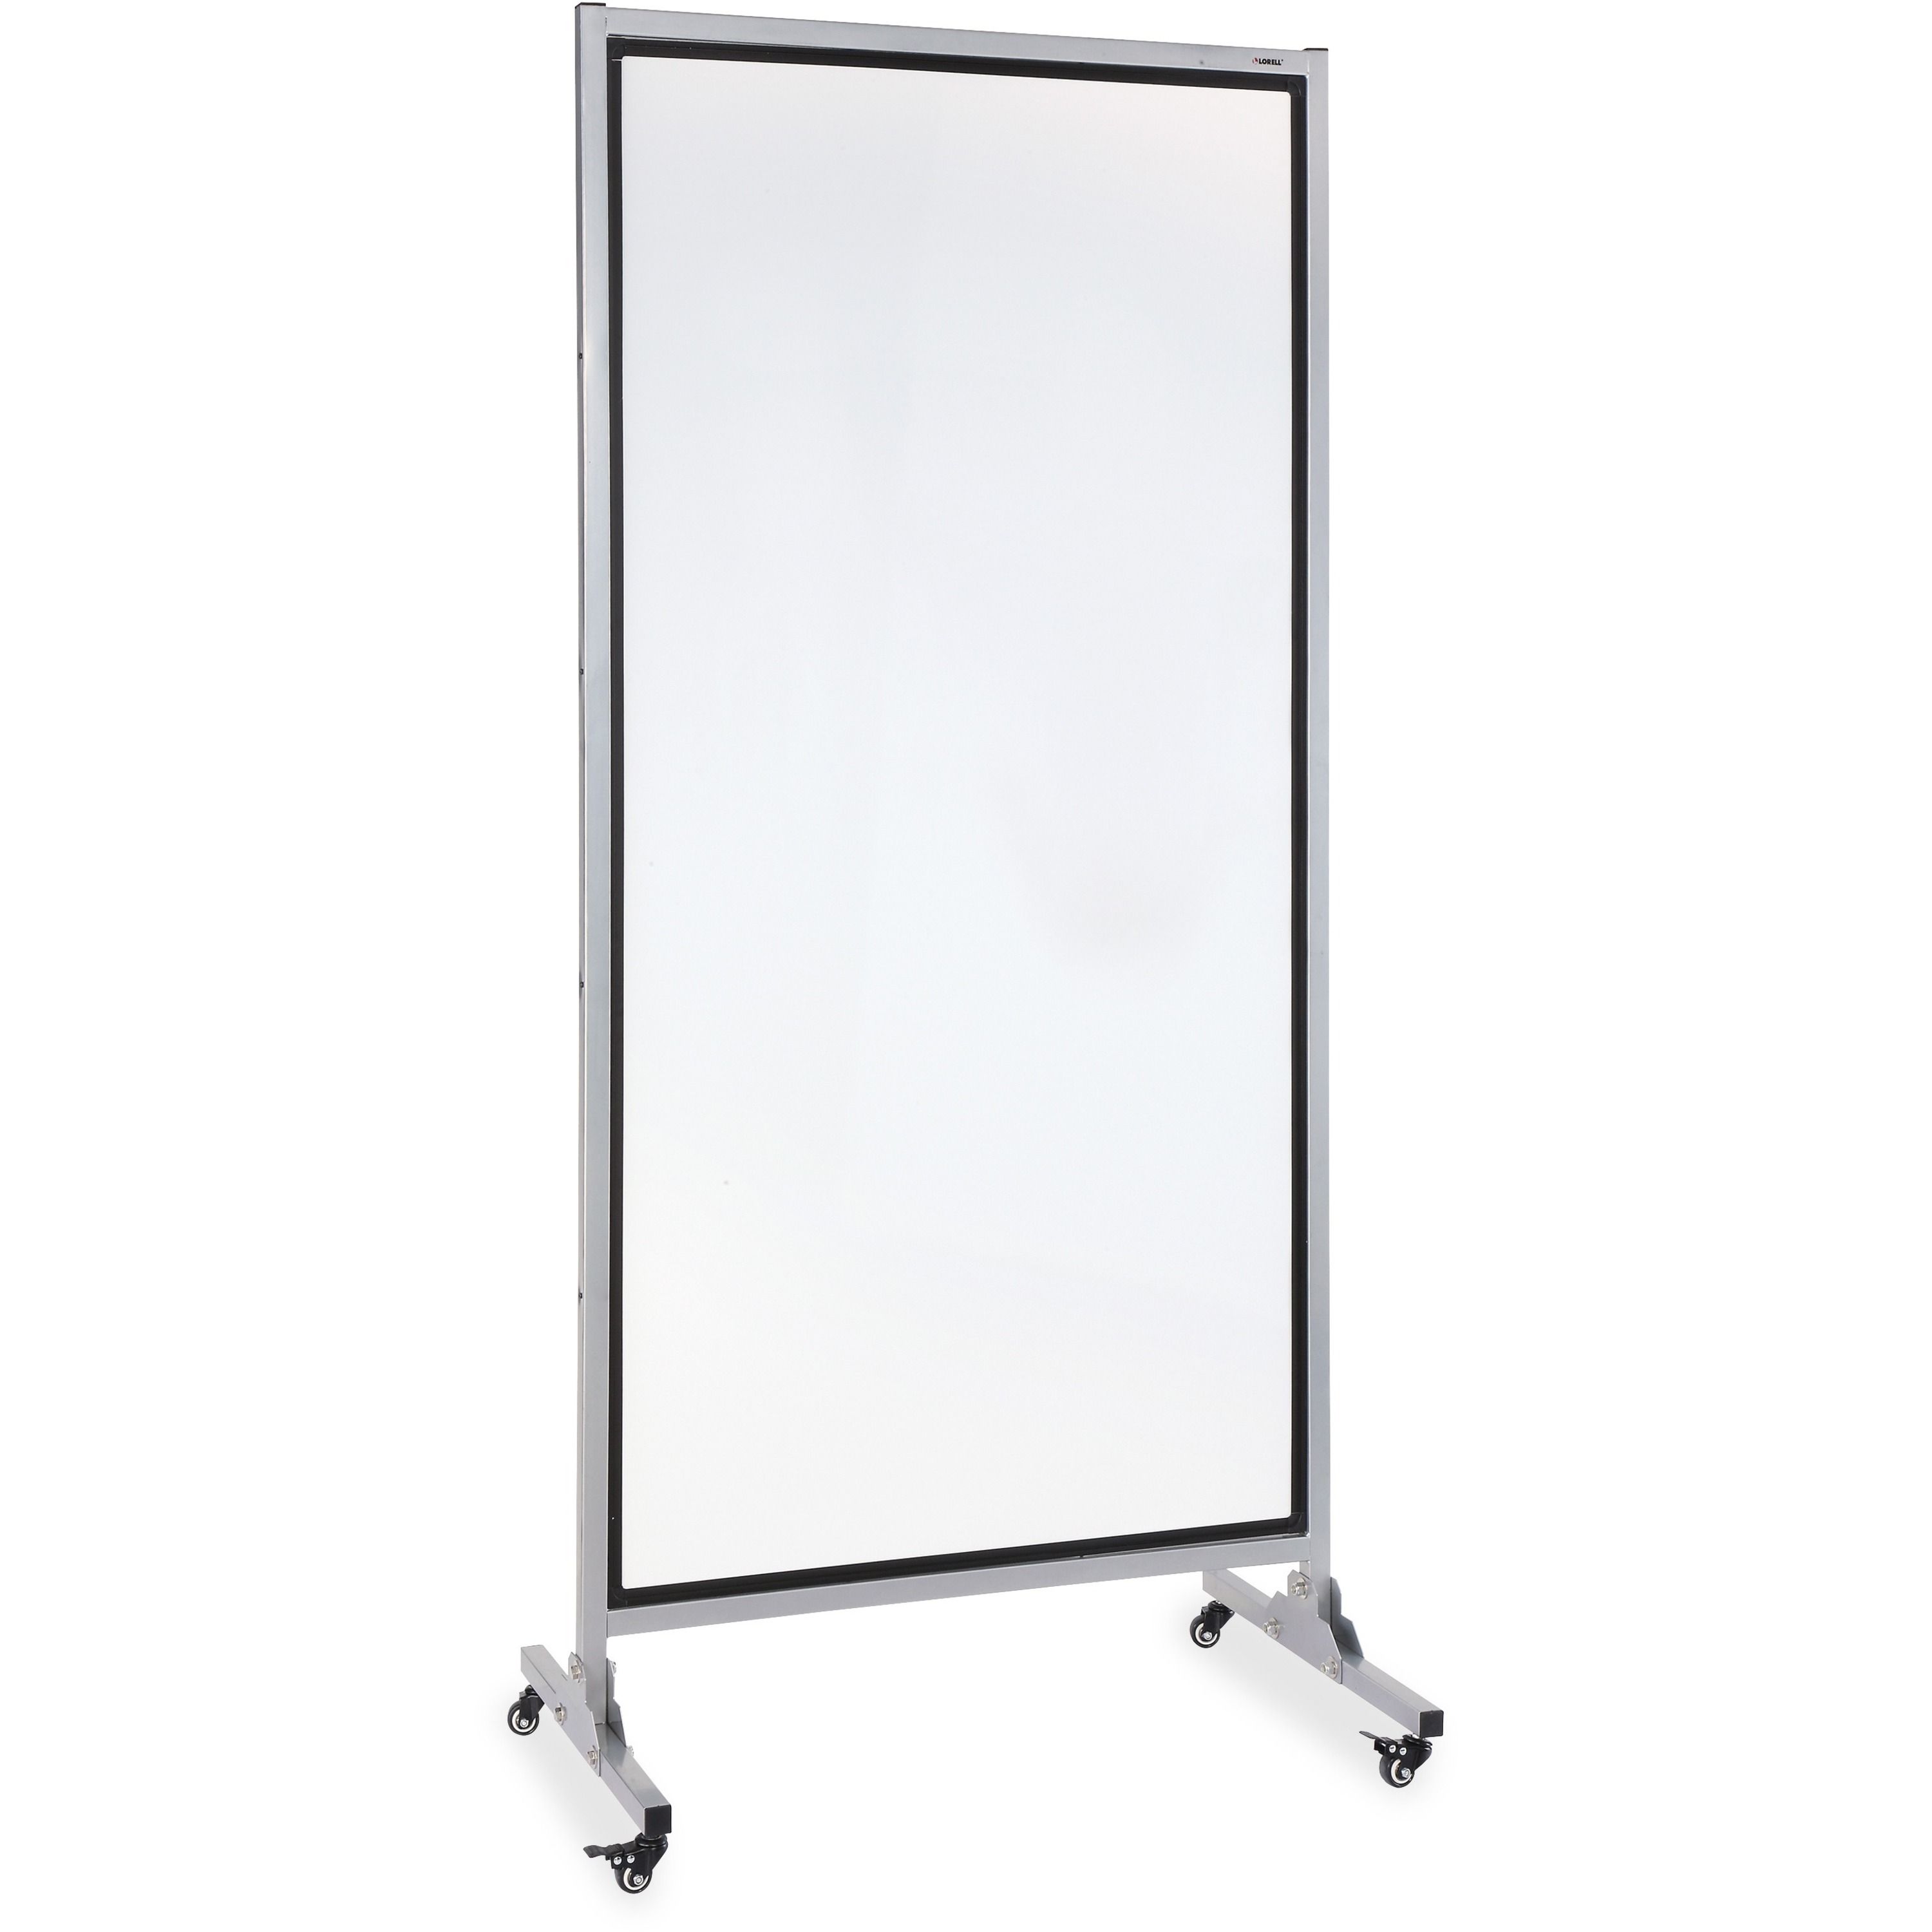 2-sided Whiteboard Easel by Lorell LLR55630